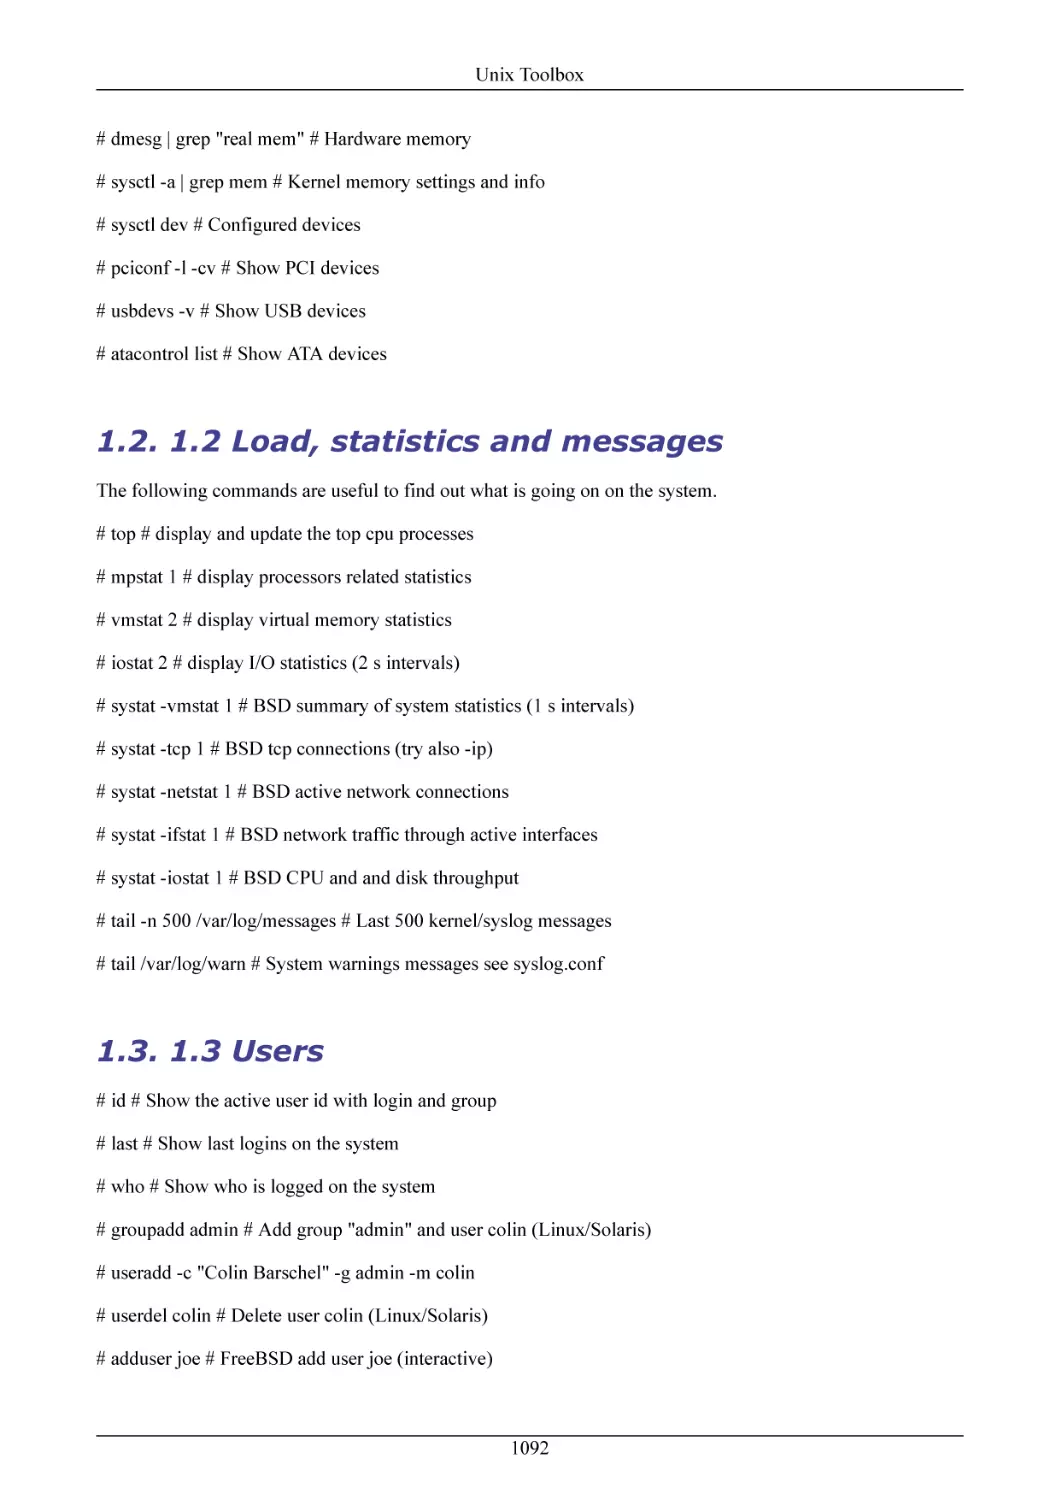 1.2 Load, statistics and messages
1.3 Users